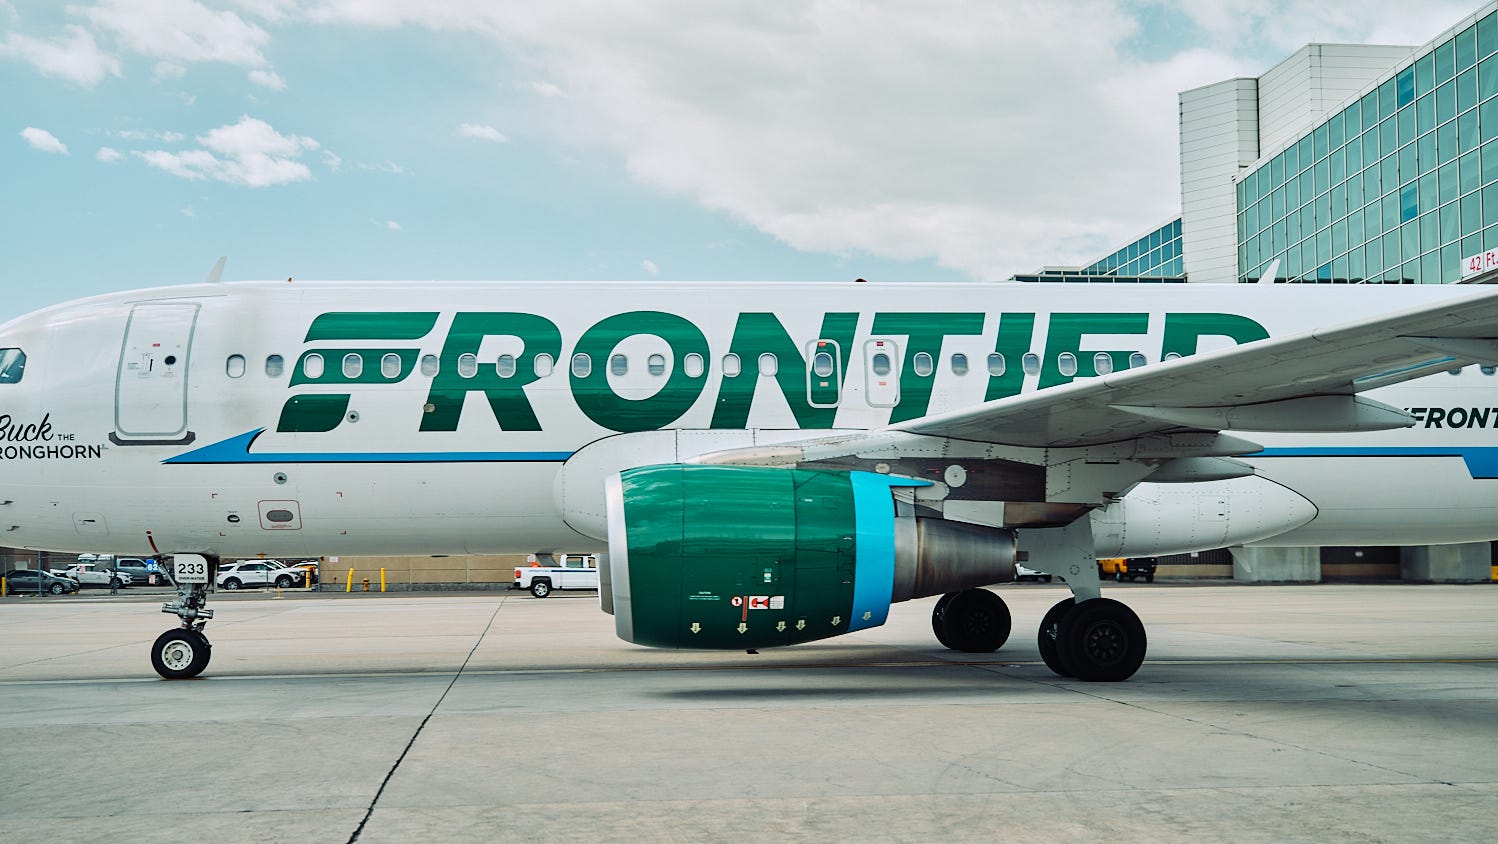  Frontier offers 1-day sale: Book $43 round-trip flights only on Earth Day 